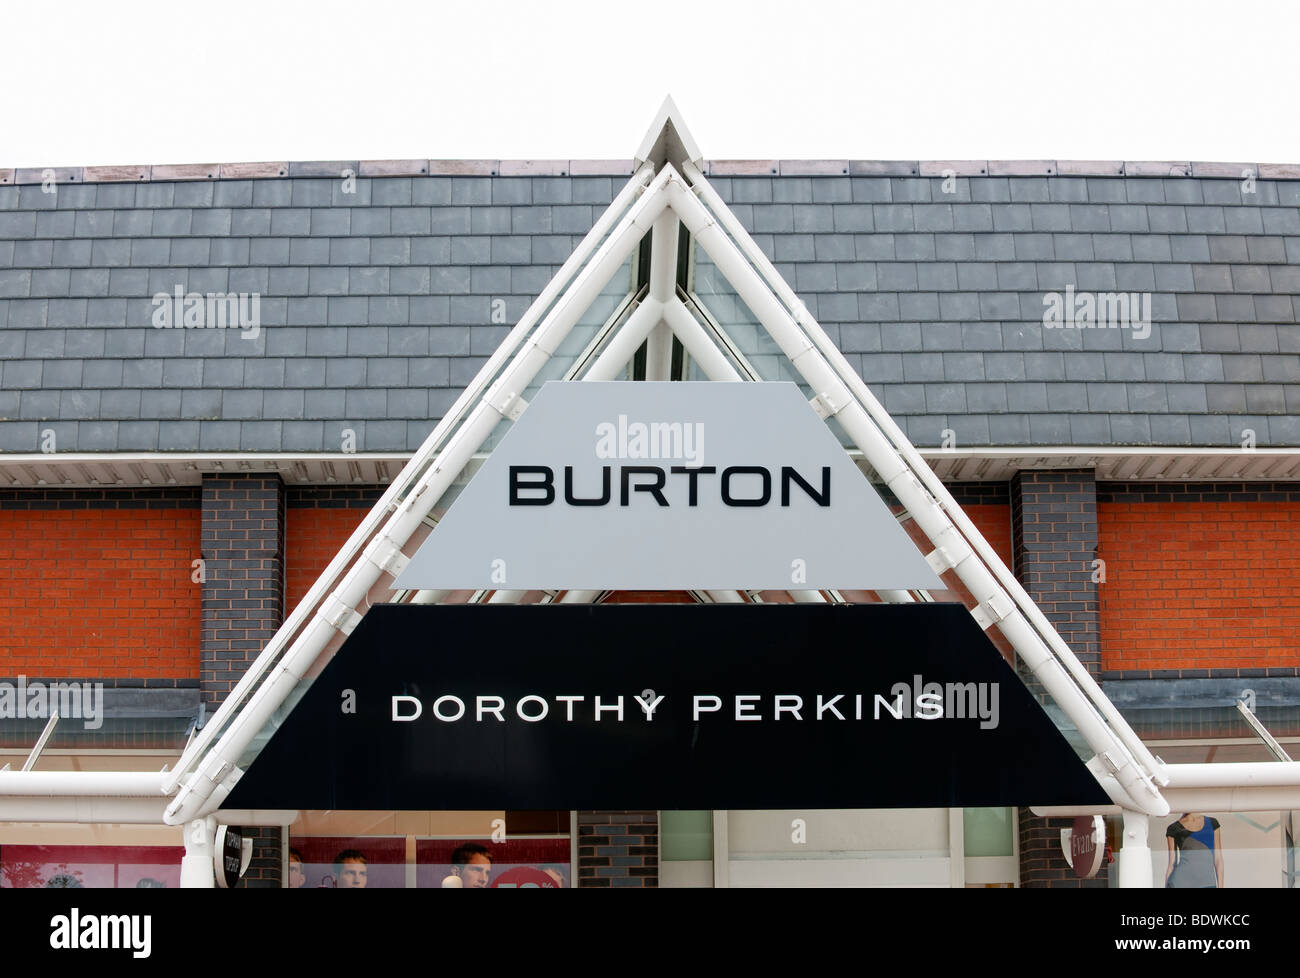 The sign over a Burton and Dorothy Perkins branch Stock Photo